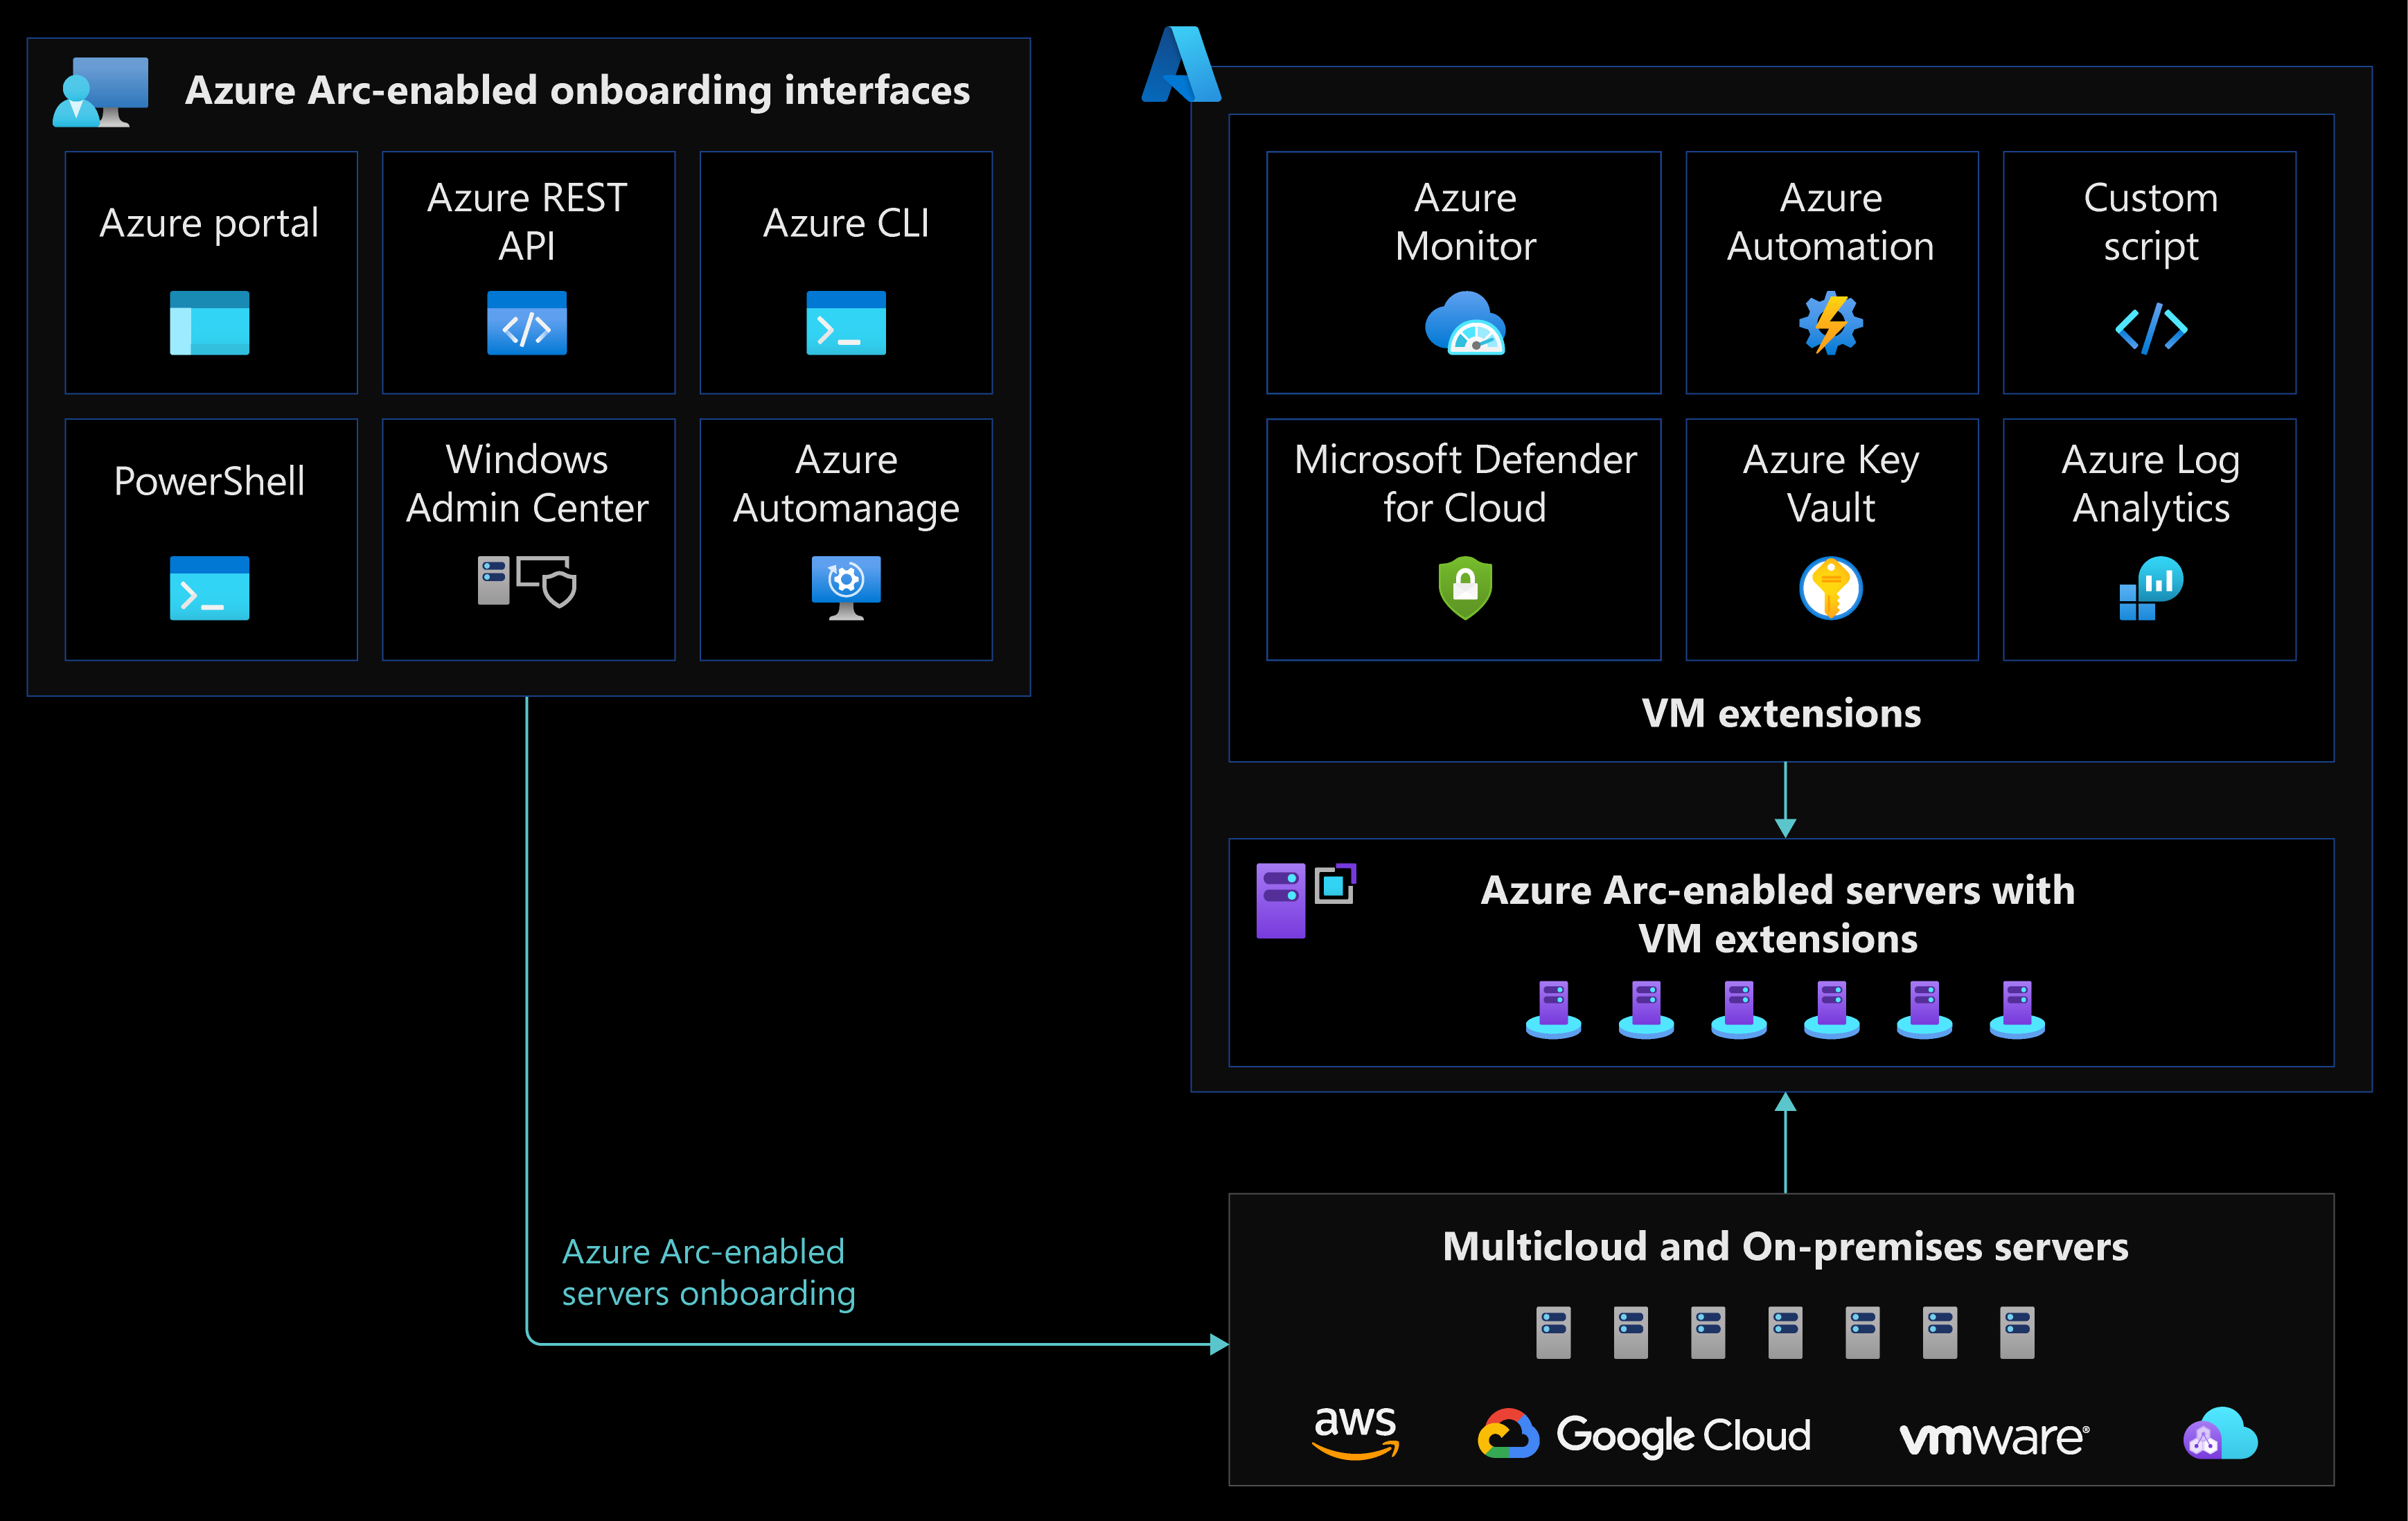 Diagram that shows Azure Arc-enabled data services, including Onboarding and V M extension integration.